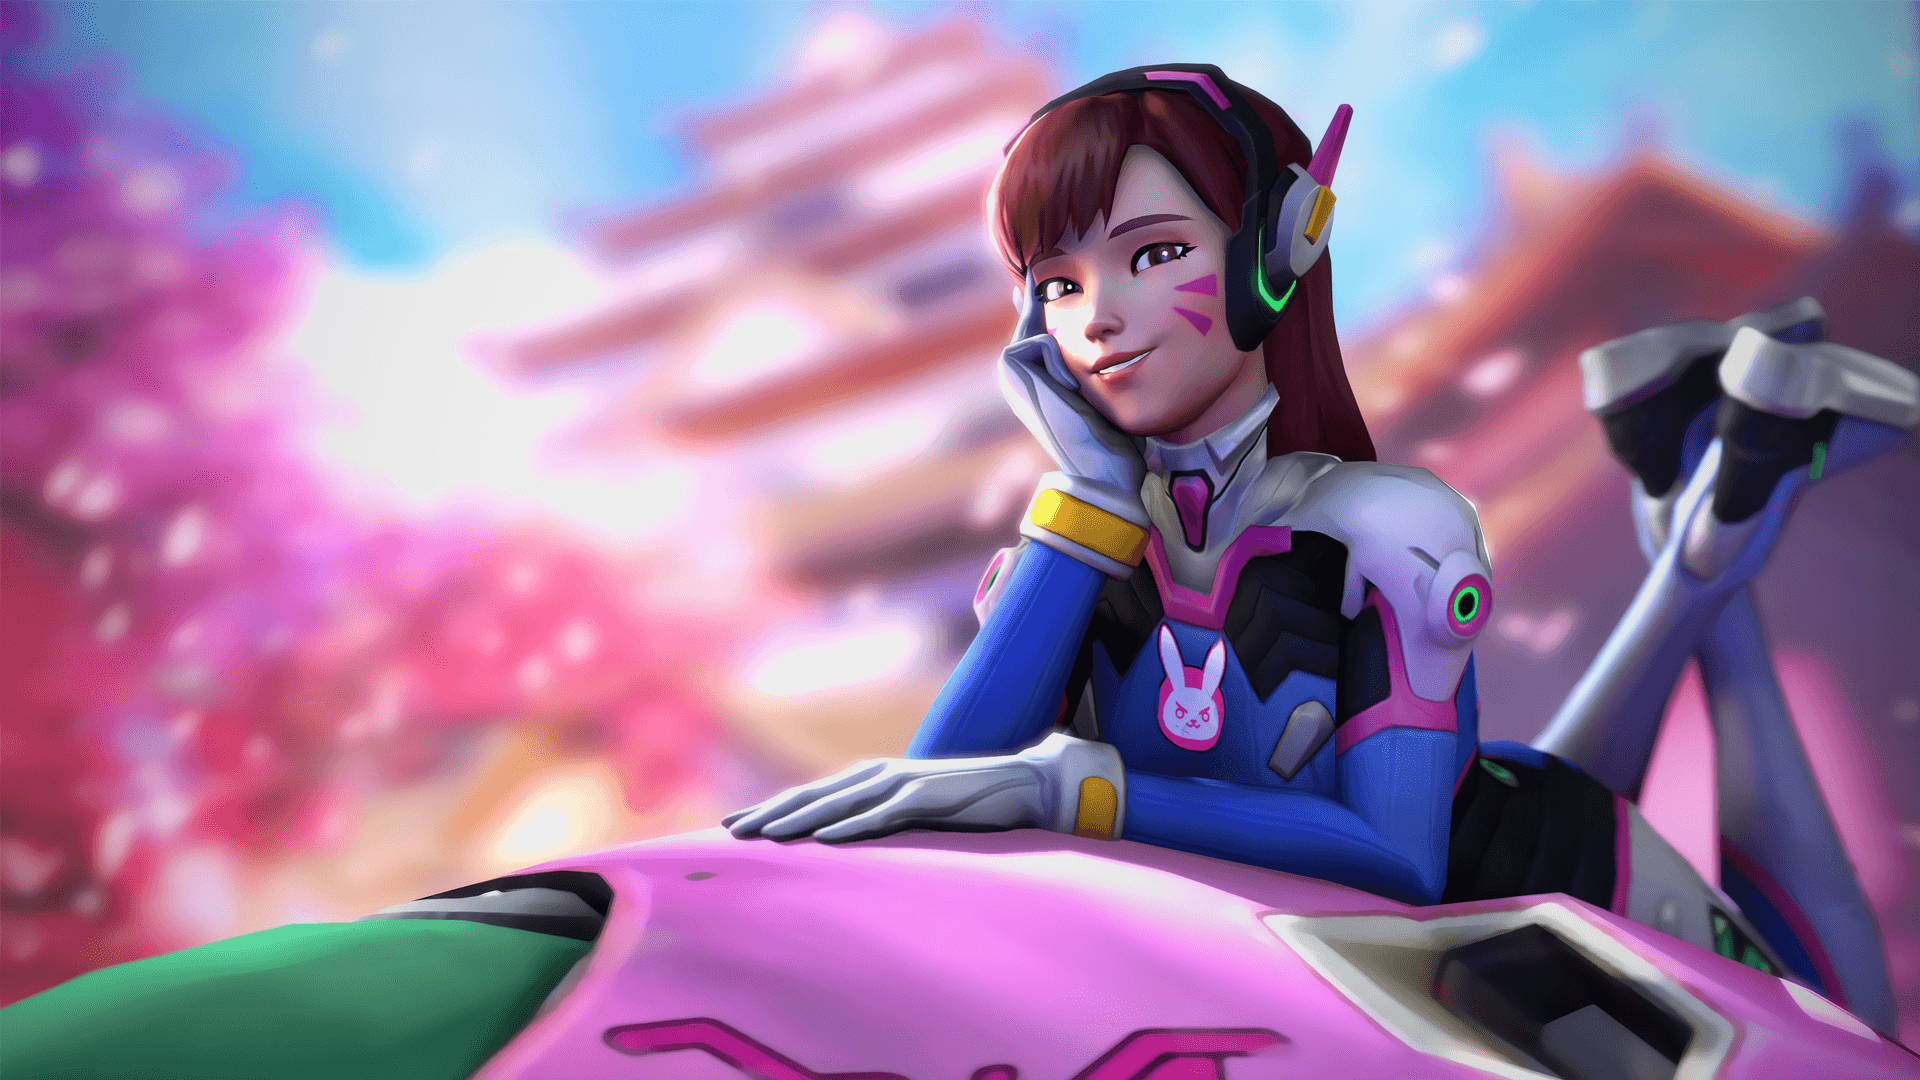 Level up with the game and technology with Dva! Wallpaper